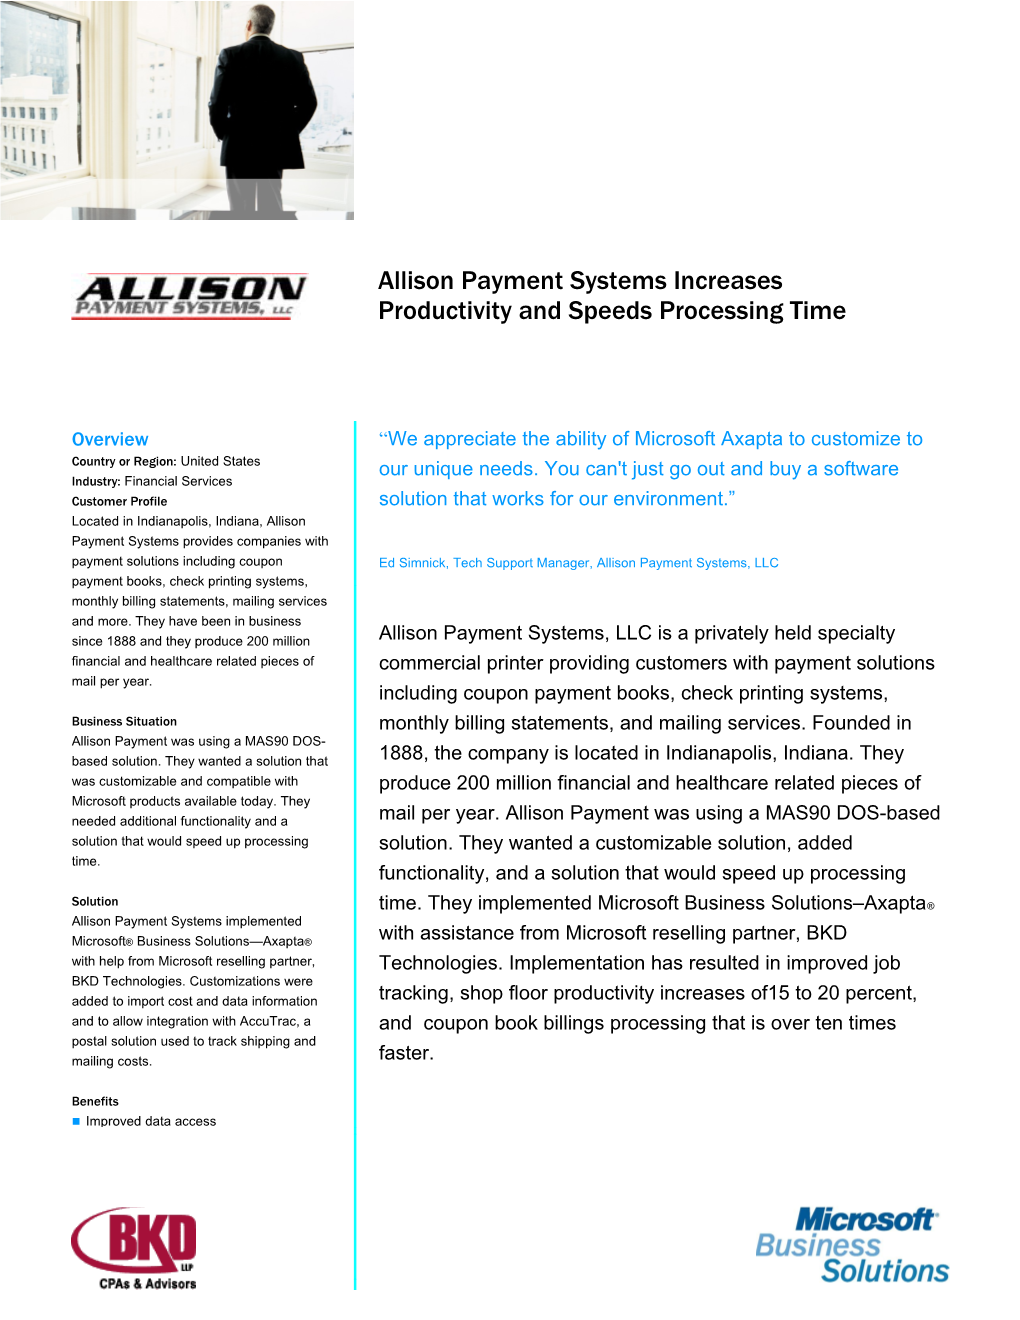 Allison Payment Systems Increases Productivity and Speeds Processing Time